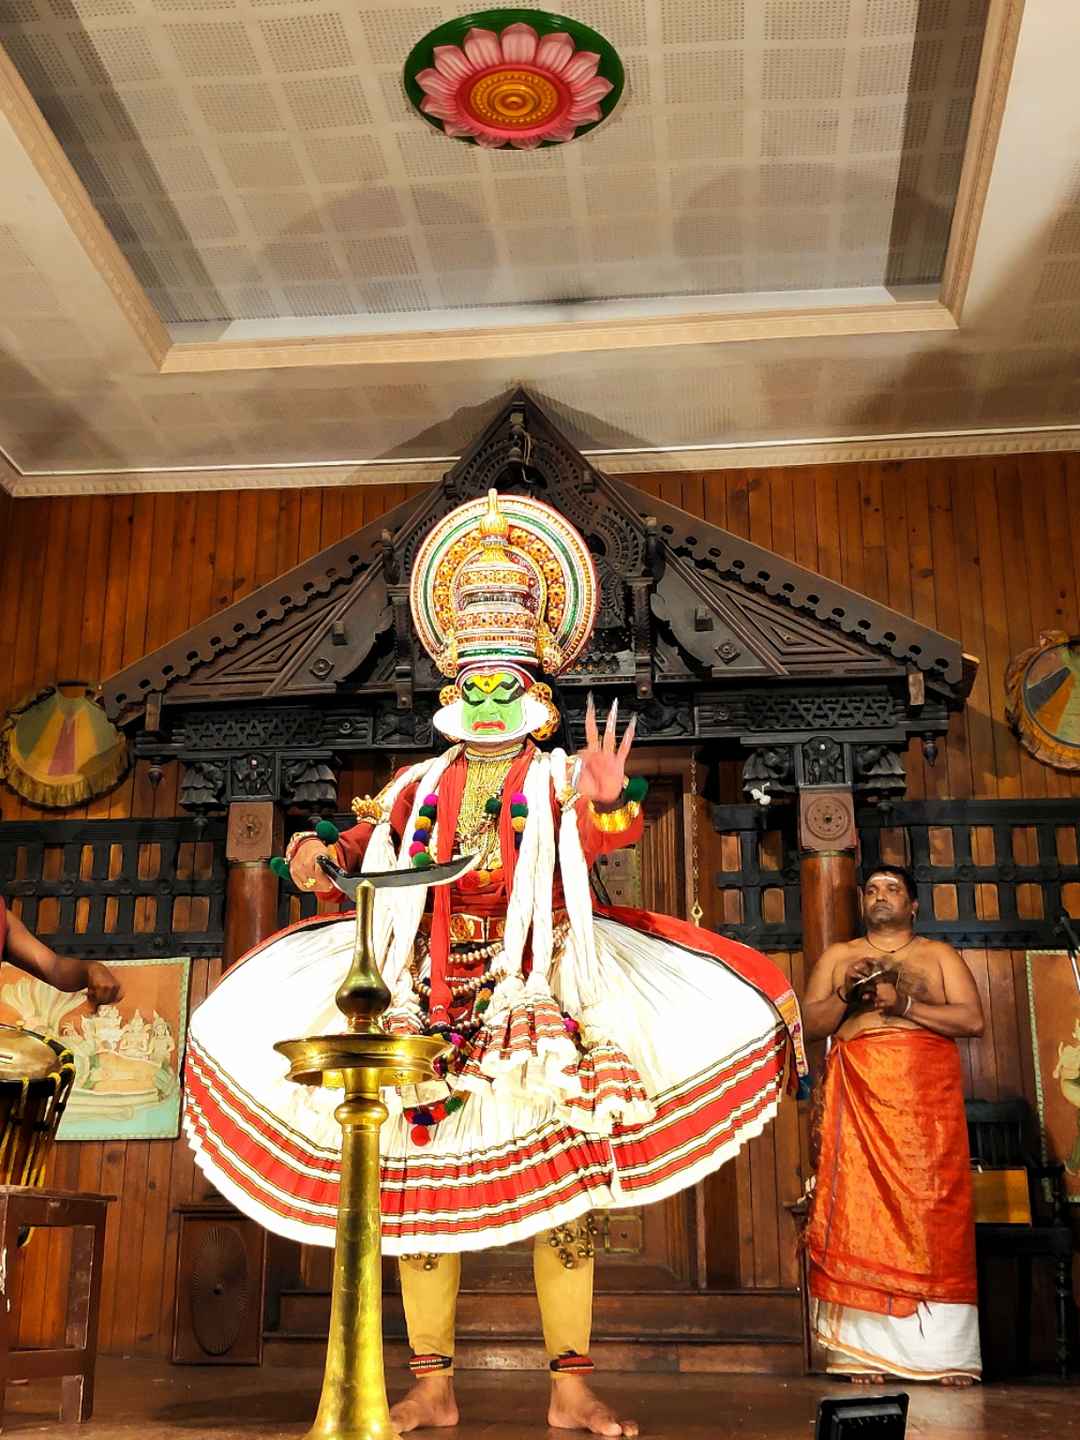 Interesting facts from Behind-The-Scenes of a Kathakali ...